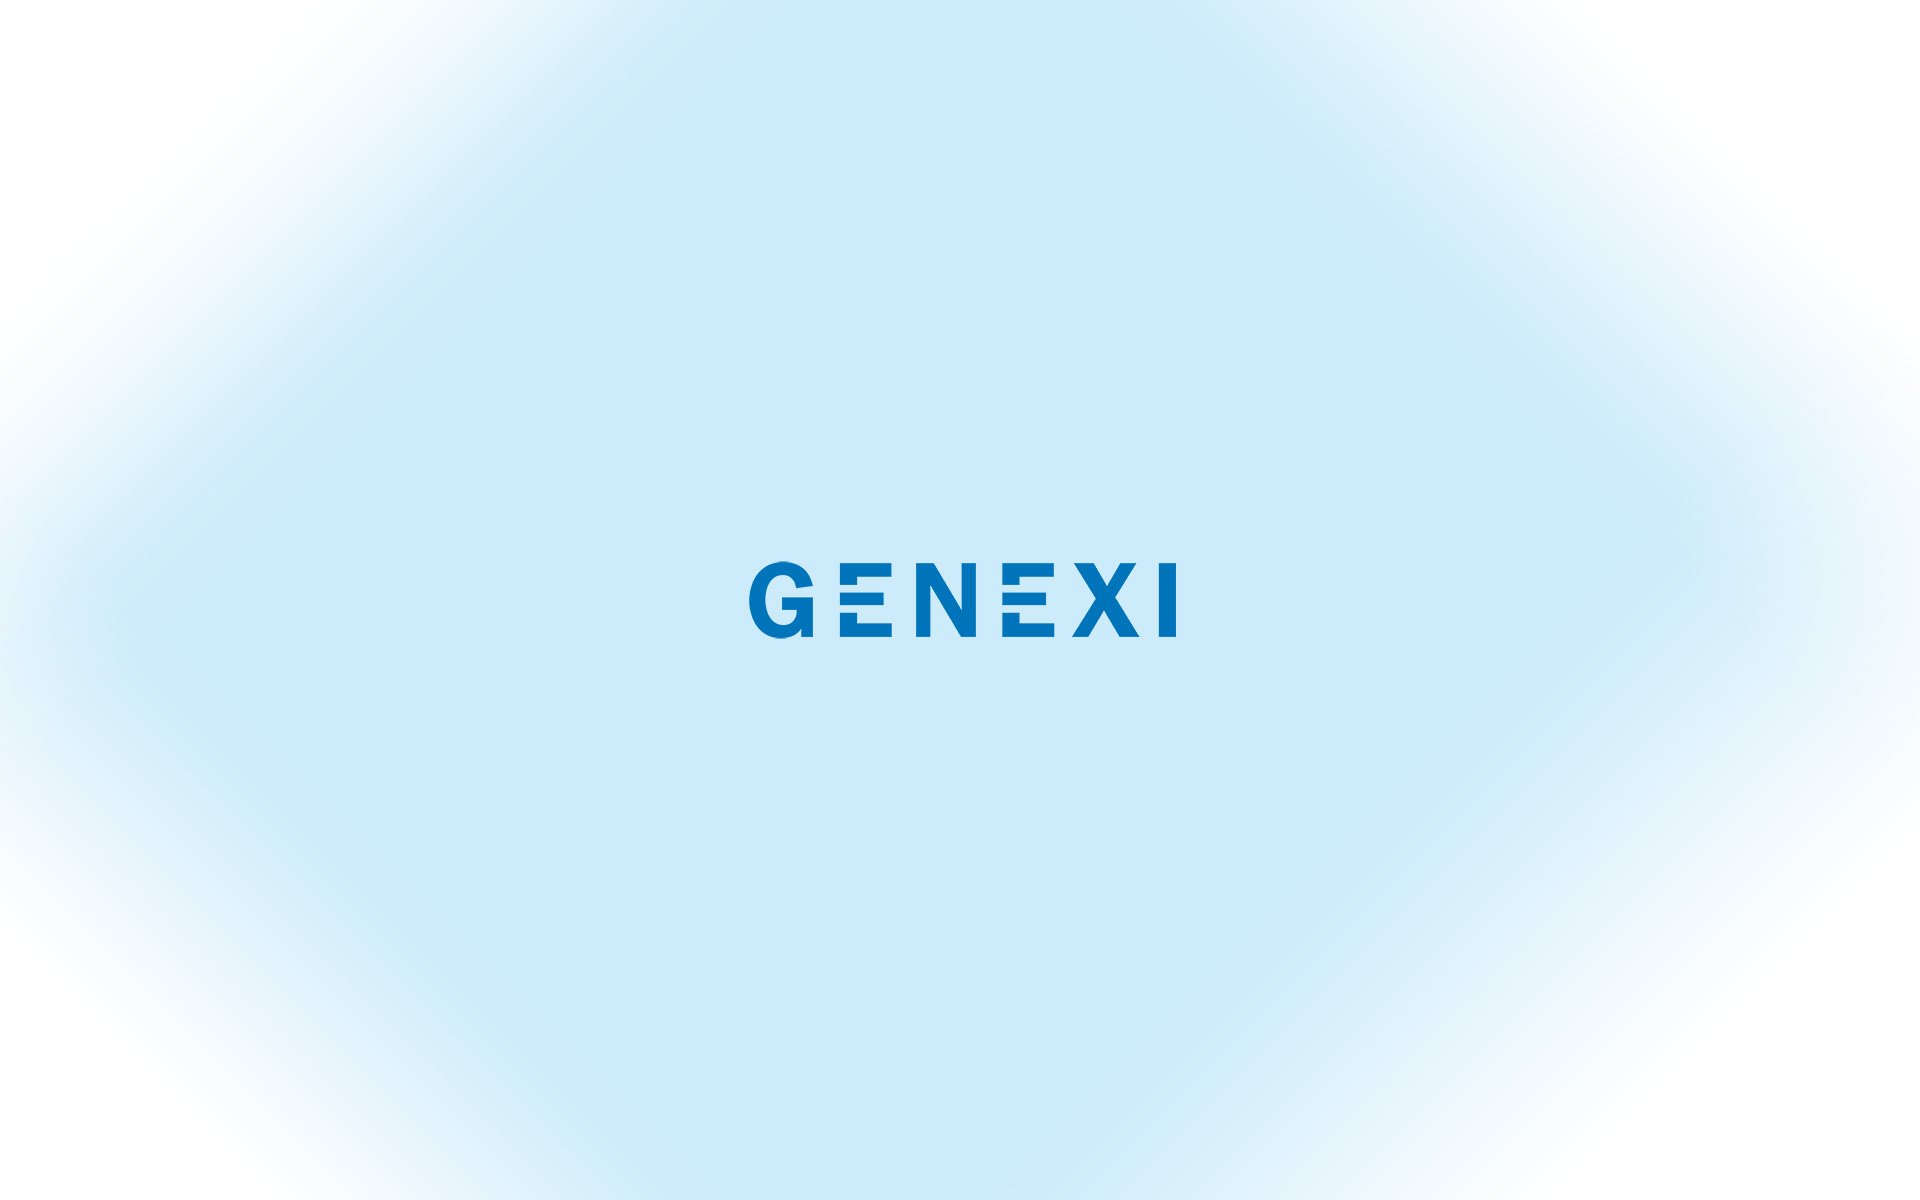 GENEXI Supports Innovative Biotech Projects